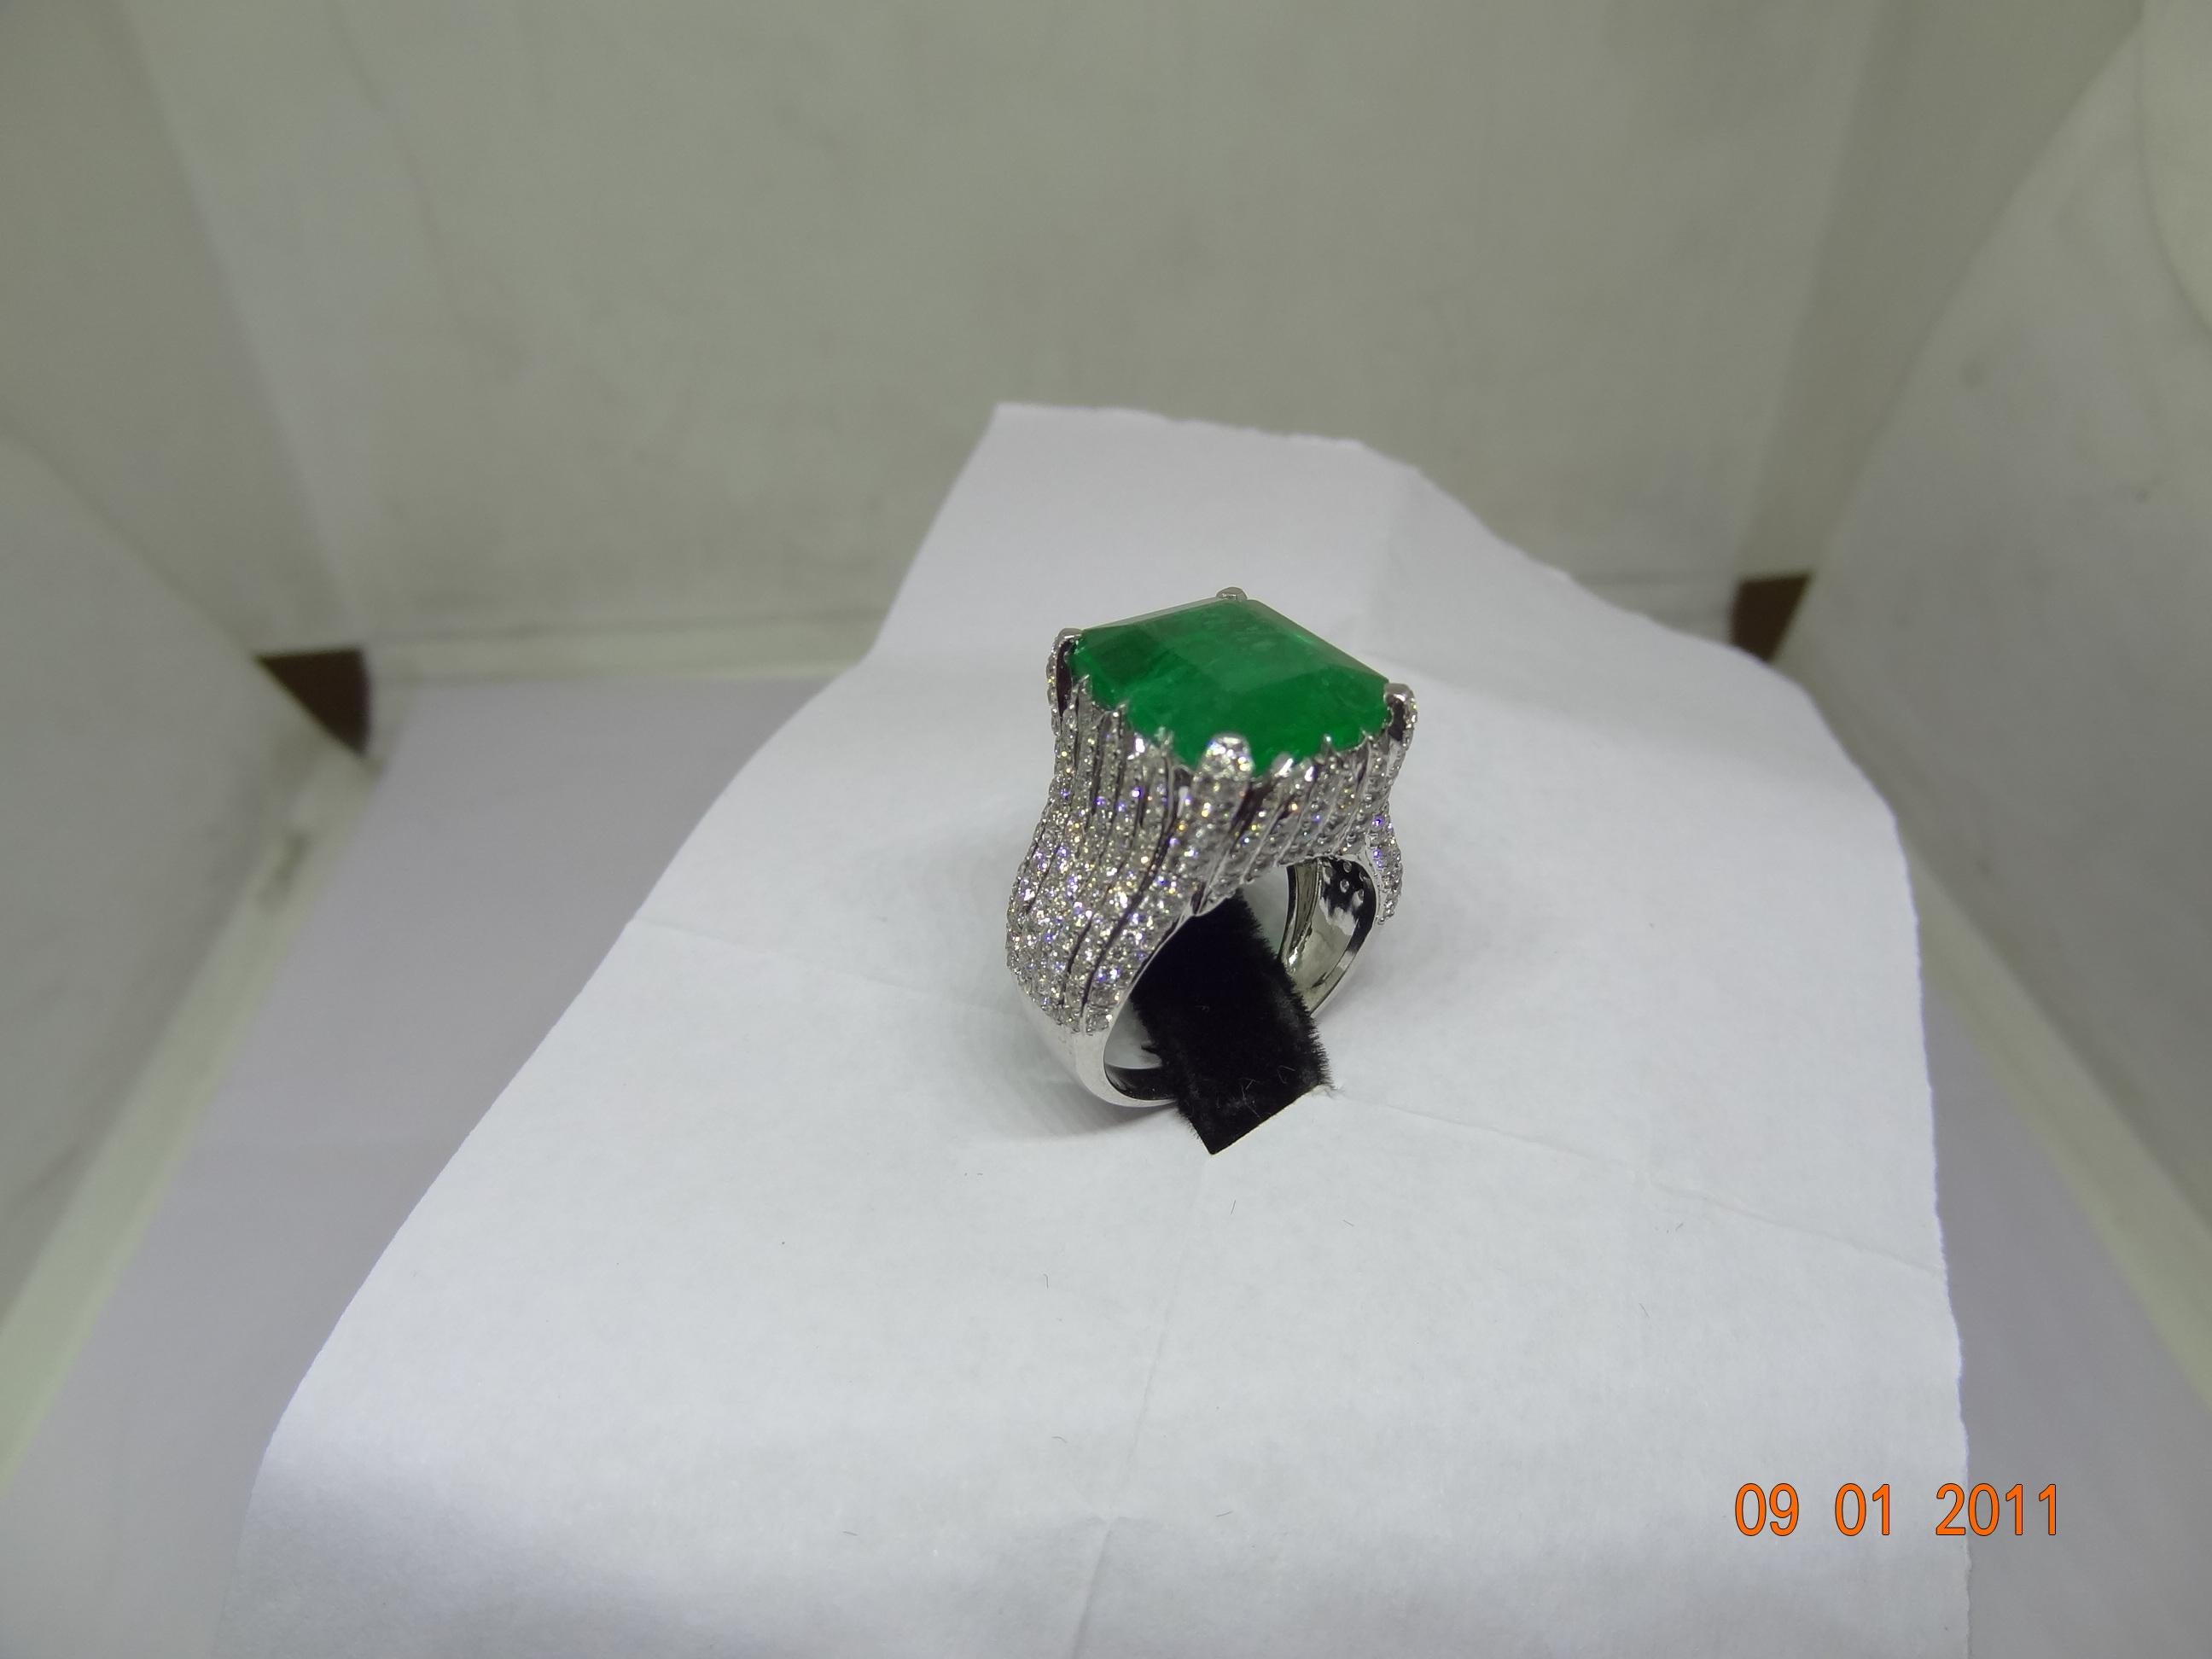 This is a natural Zambian Emerald ring with diamonds and 14k gold. The emeralds are very high quality and very good quality diamonds the clarity is vsi and G colour


Emeralds :9.75 carats
diamonds : 2.10 carats
gold : 7.92 GM

This is a brand new